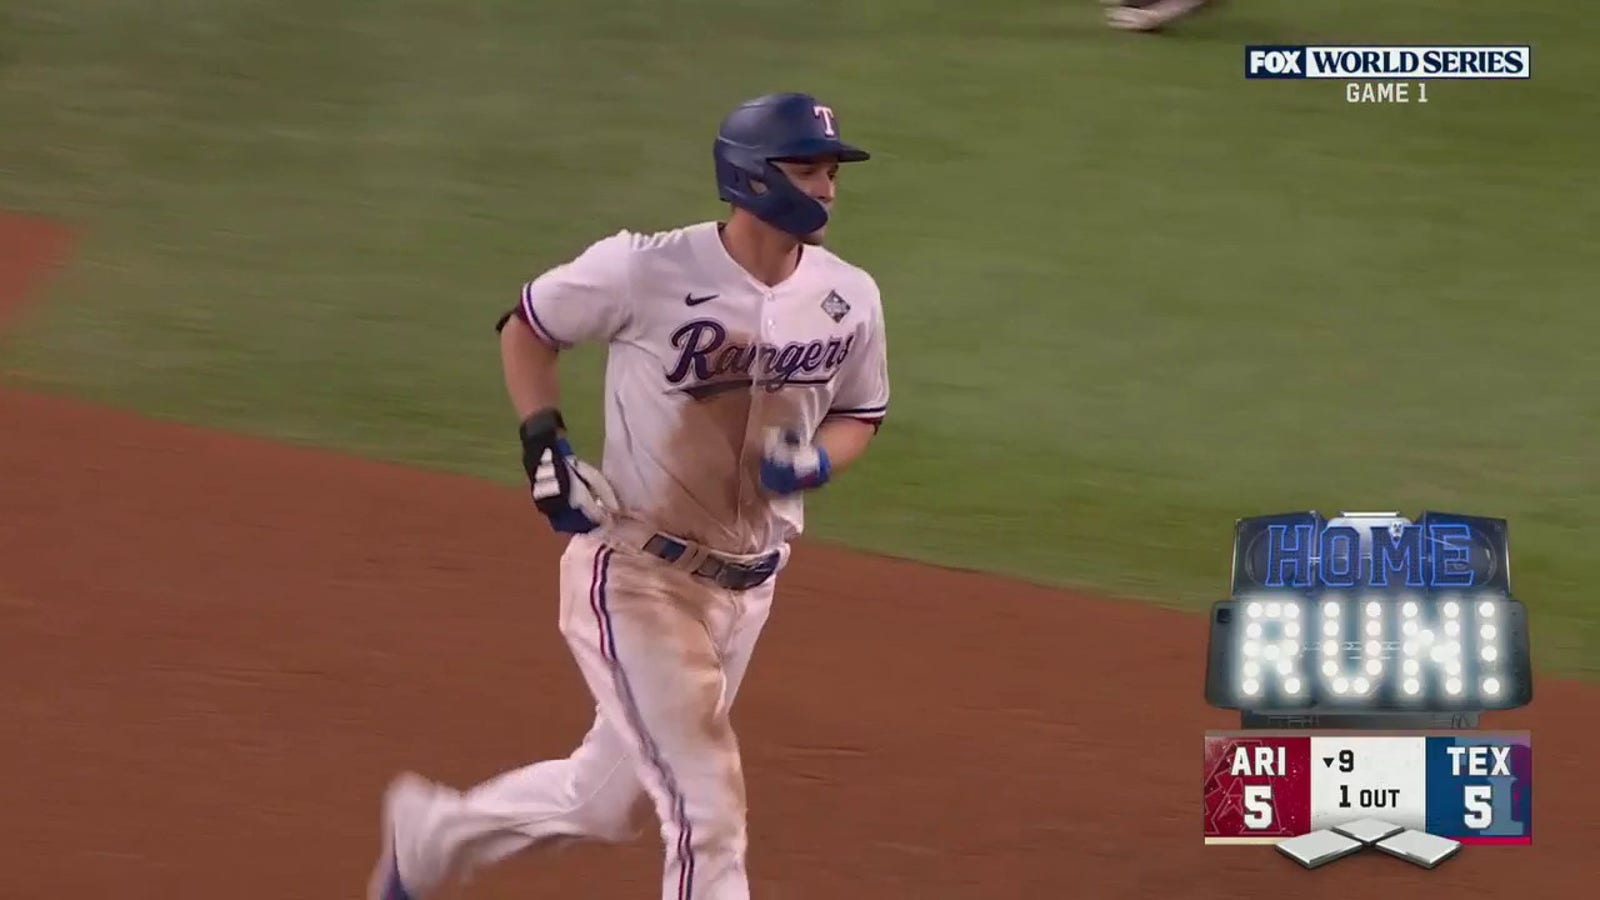 Rangers' Corey Seager CRUSHES a two-run homer to even the score against Diamondbacks in ninth